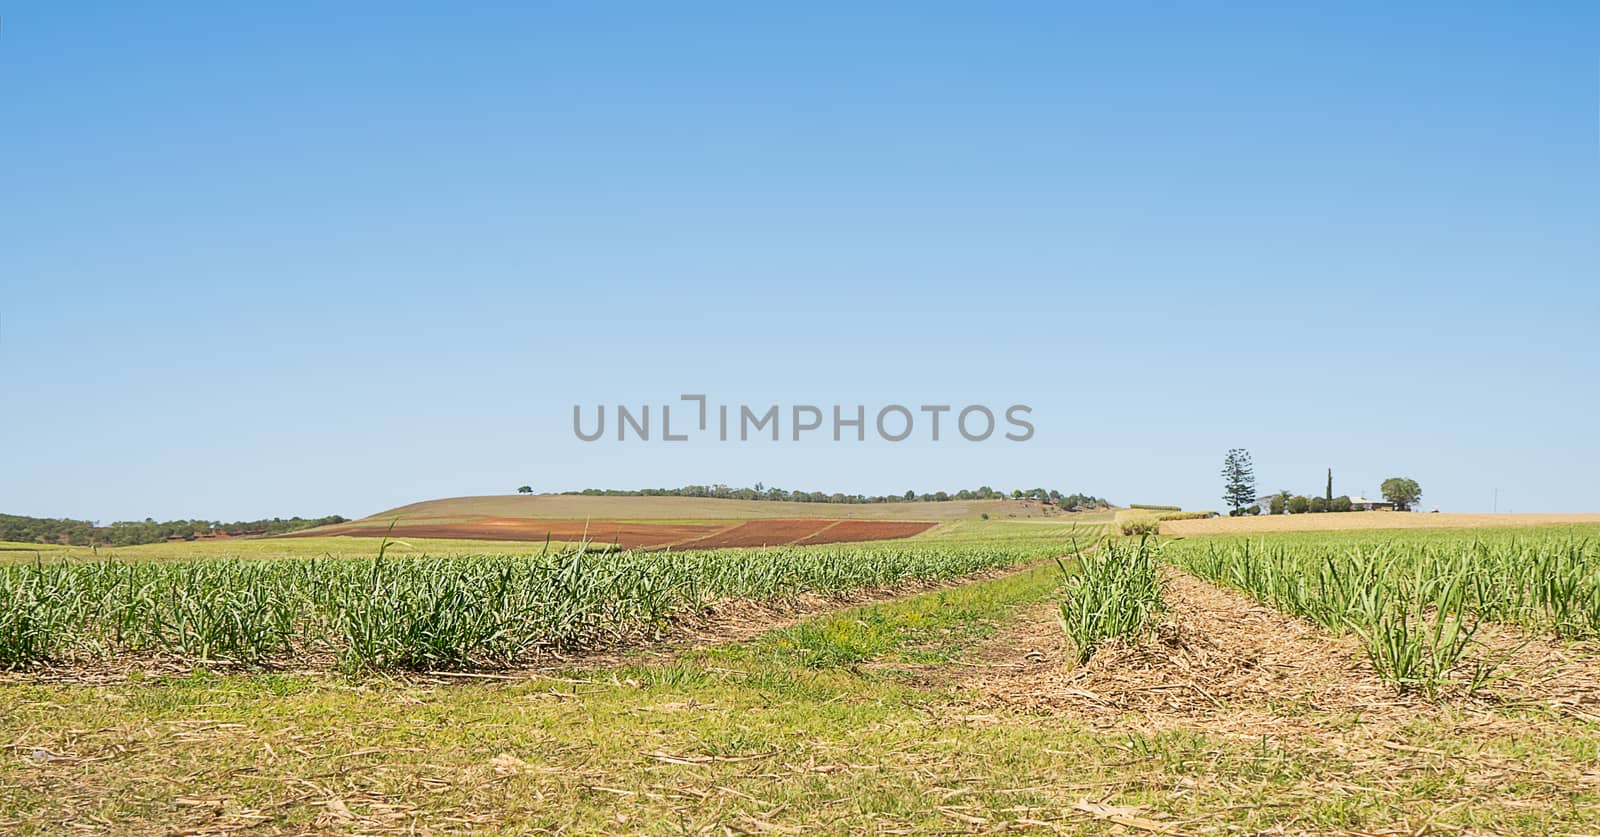 Australian sugarcane plantation in spring after winter harvest with new cane growing and some ploughed paddocks